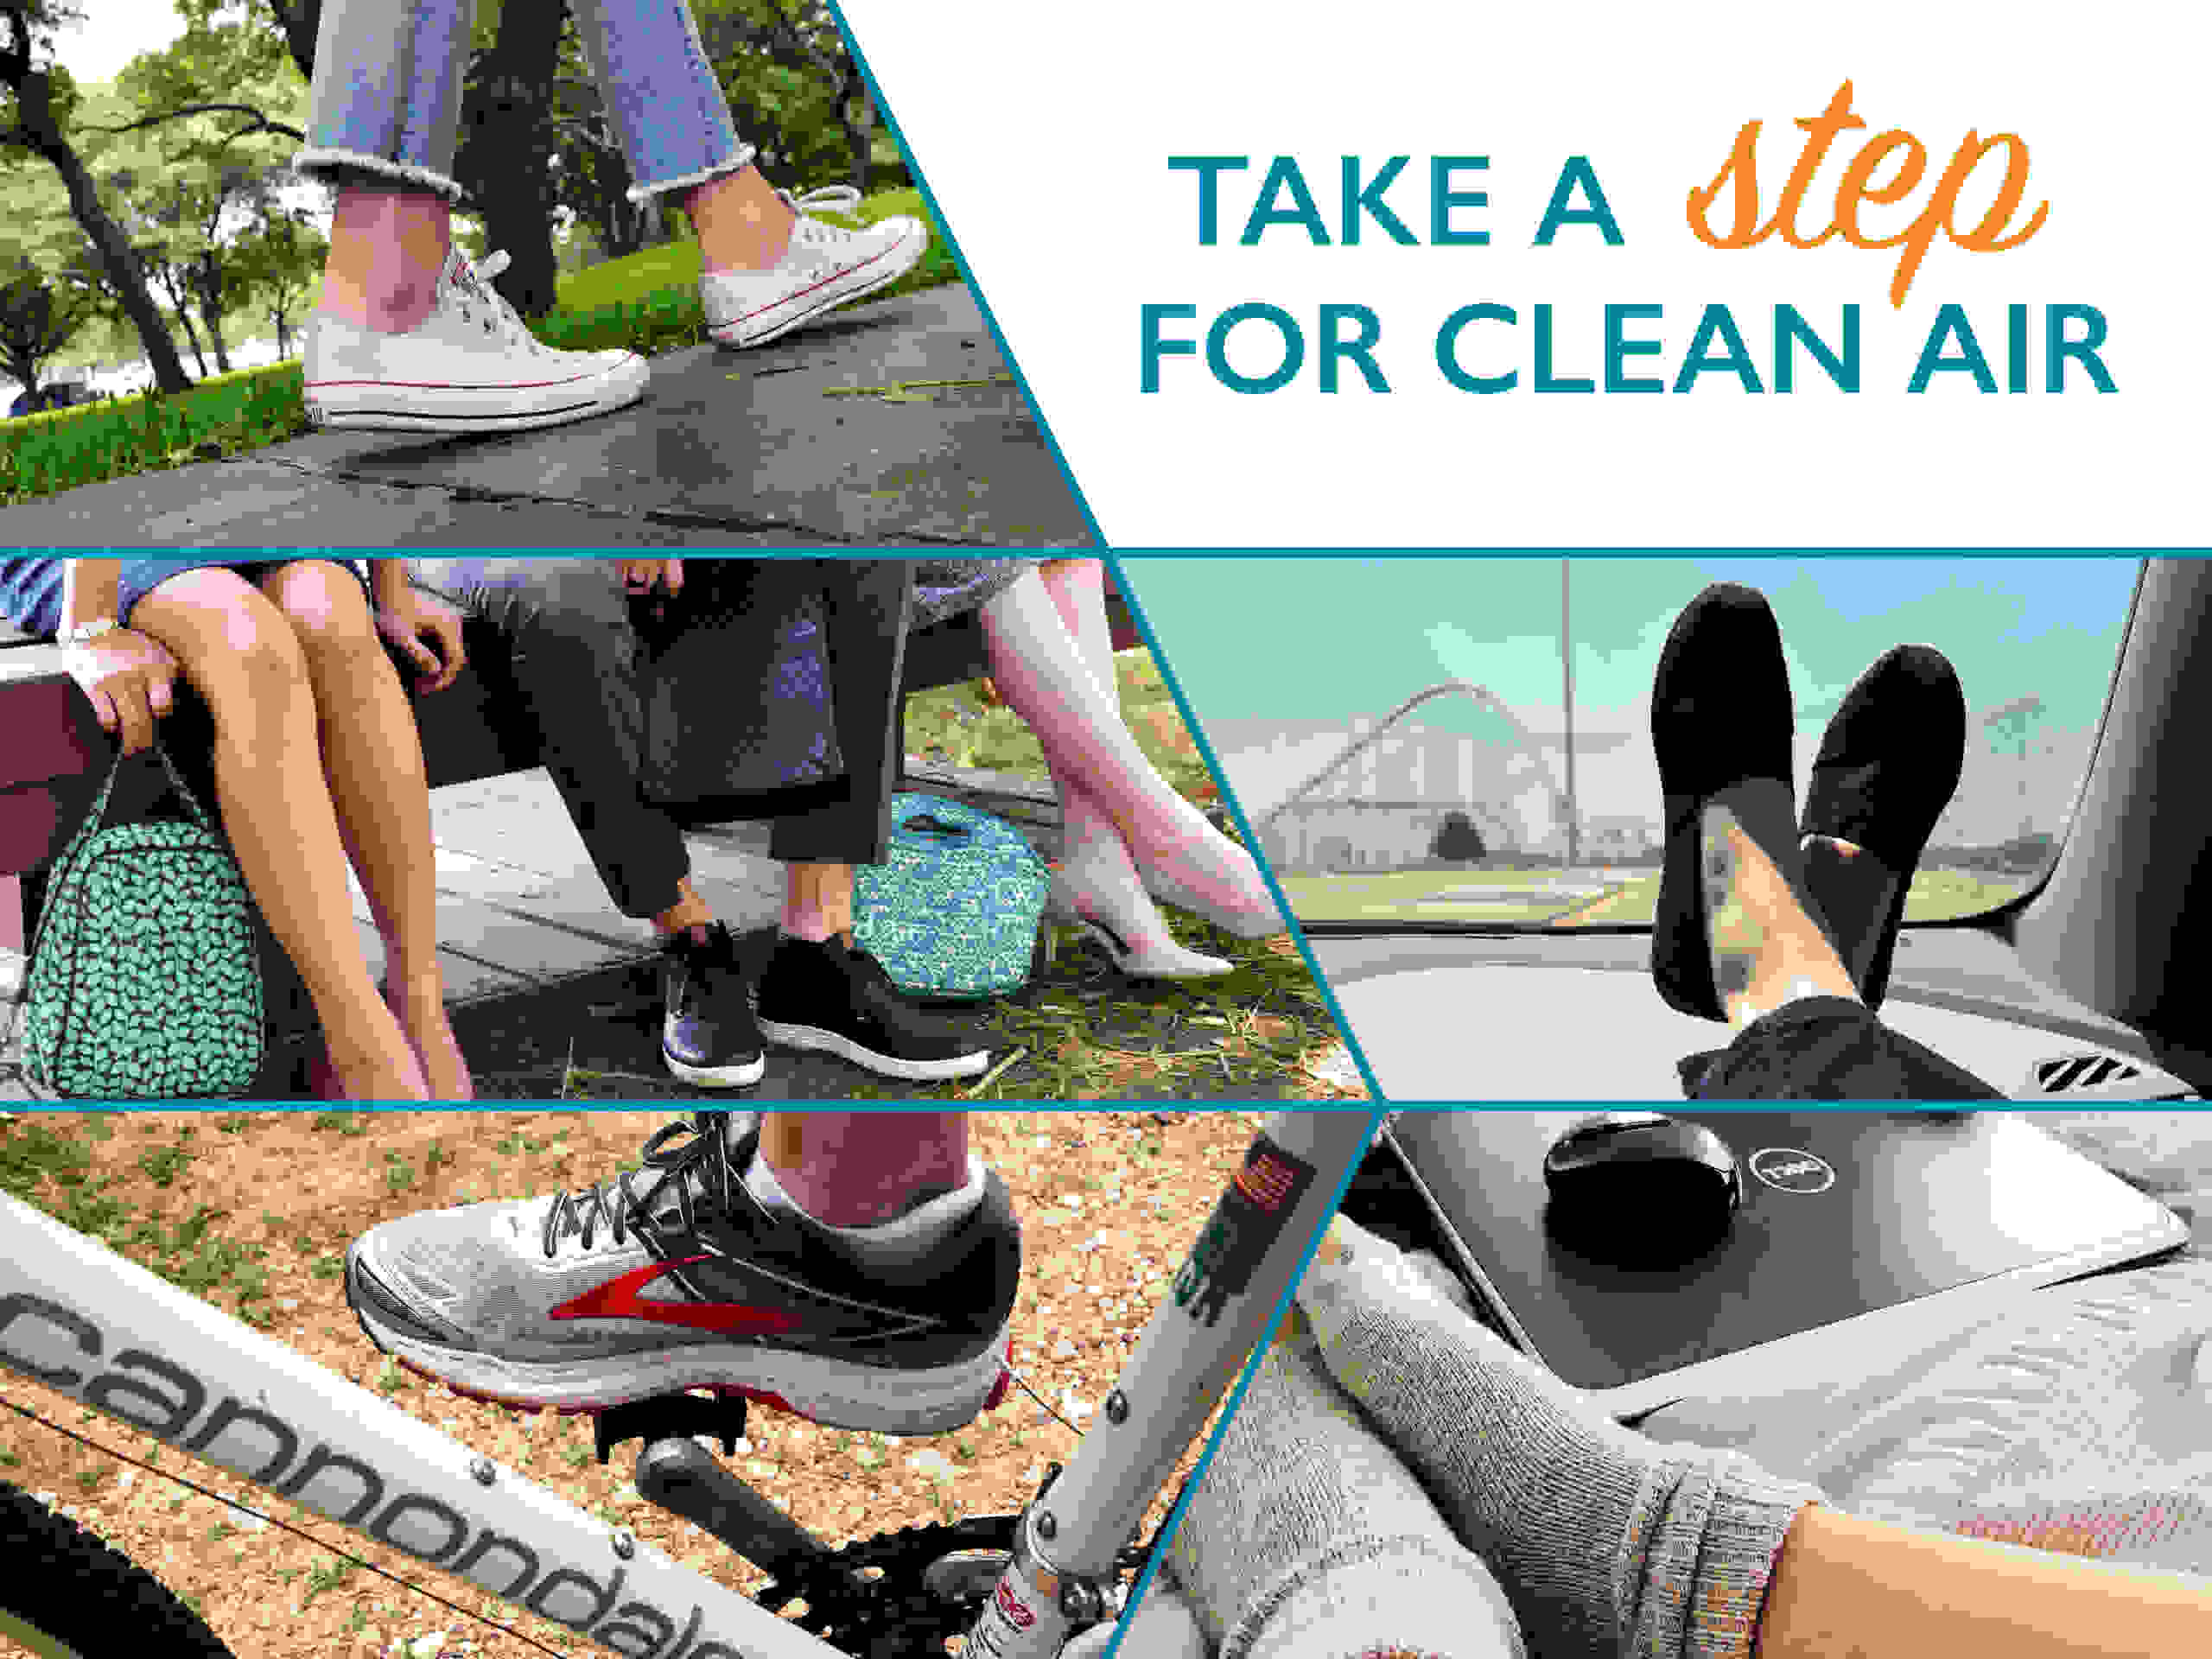 How to be “Air Aware” for Clean Air Action Day